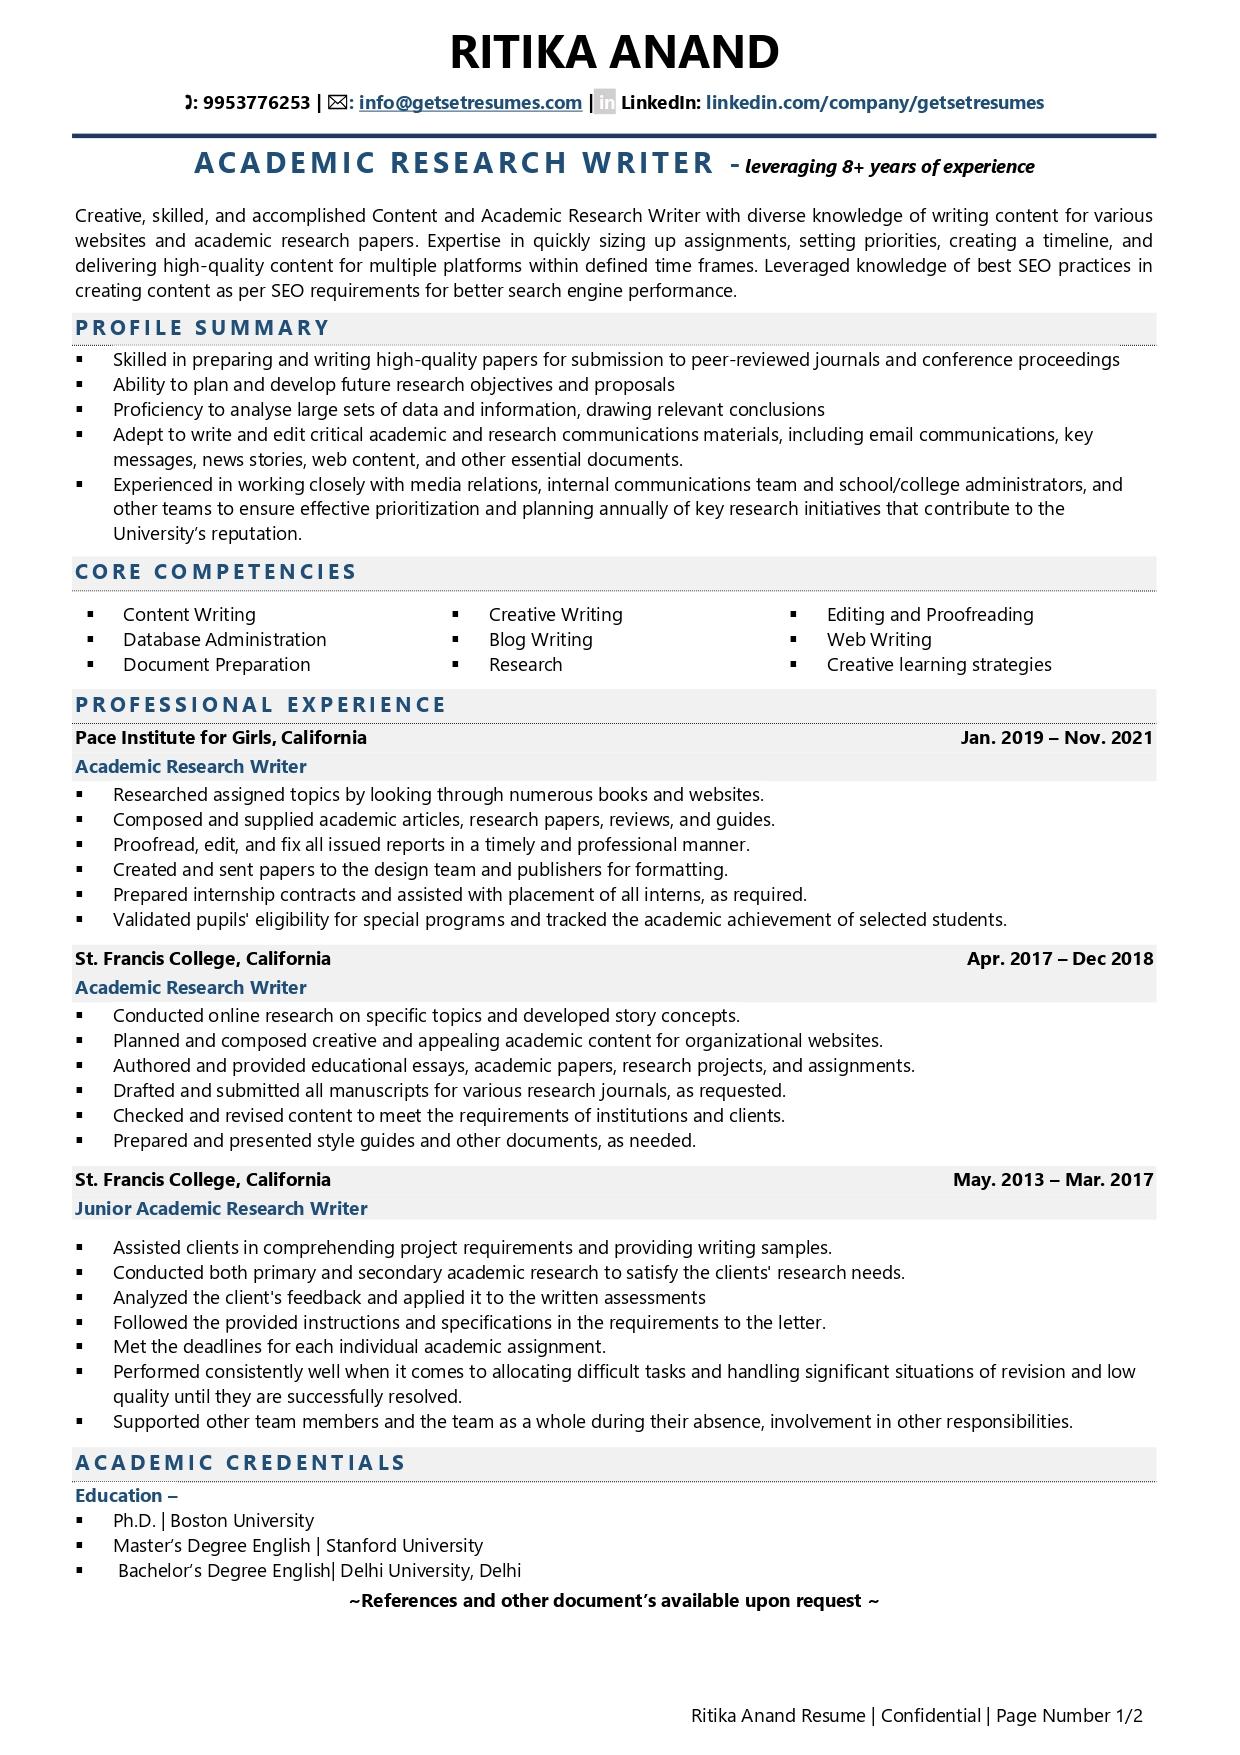 Academic Research Writer Resume Examples Template (with job winning tips)